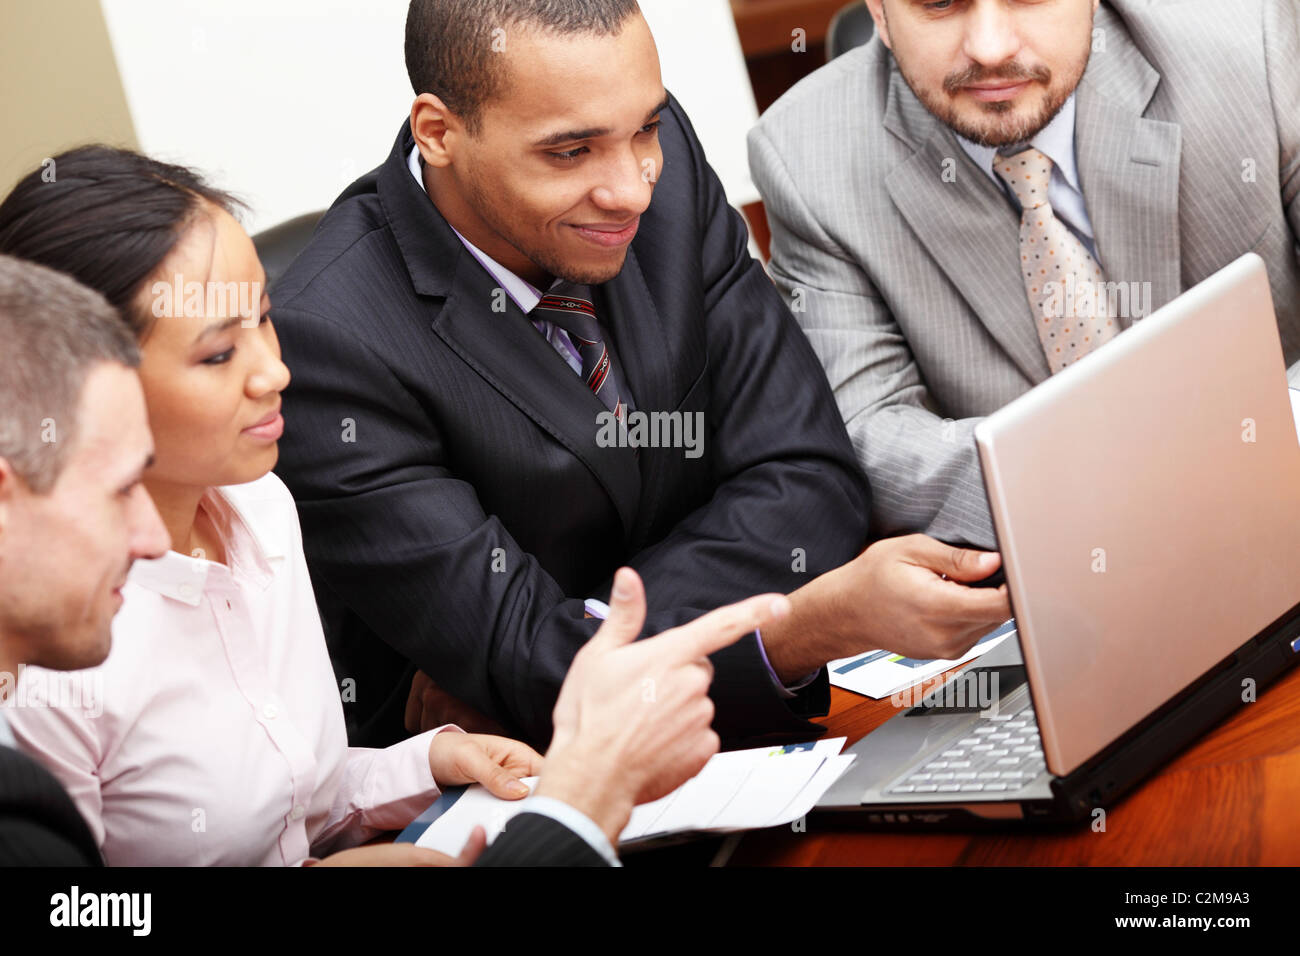 Multi ethnic business team at a meeting Stock Photo